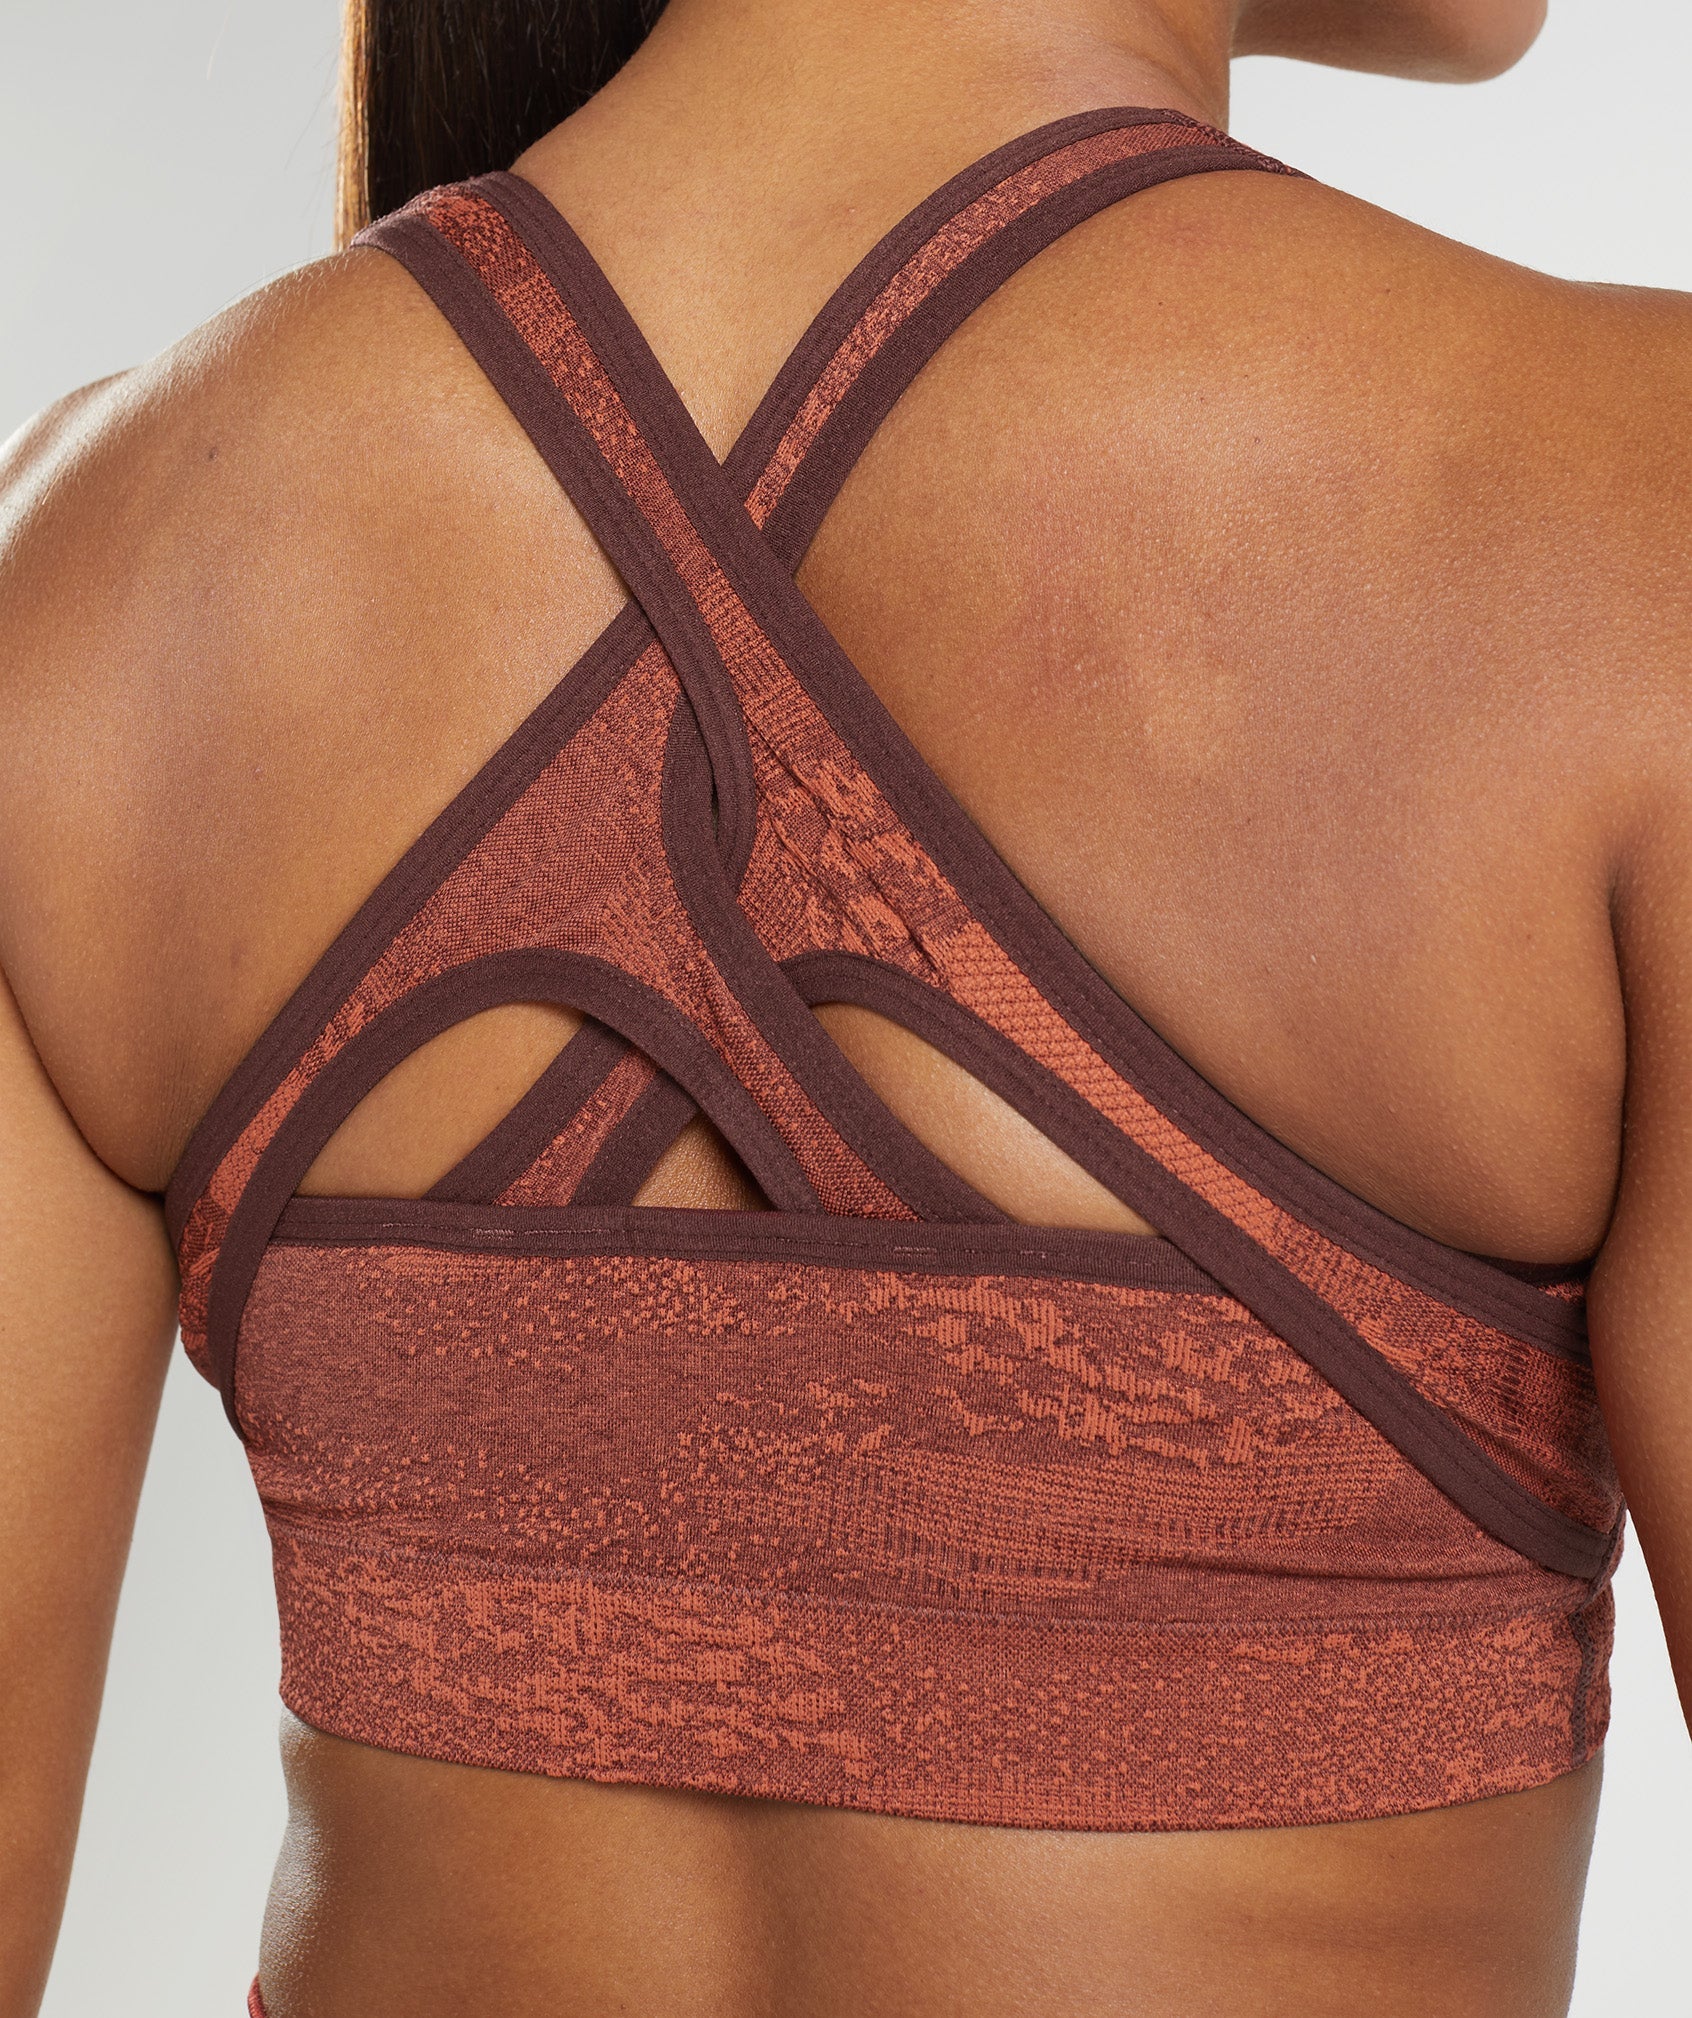 Adapt Camo Seamless Sports Bra in Storm Red/Cherry Brown - view 5